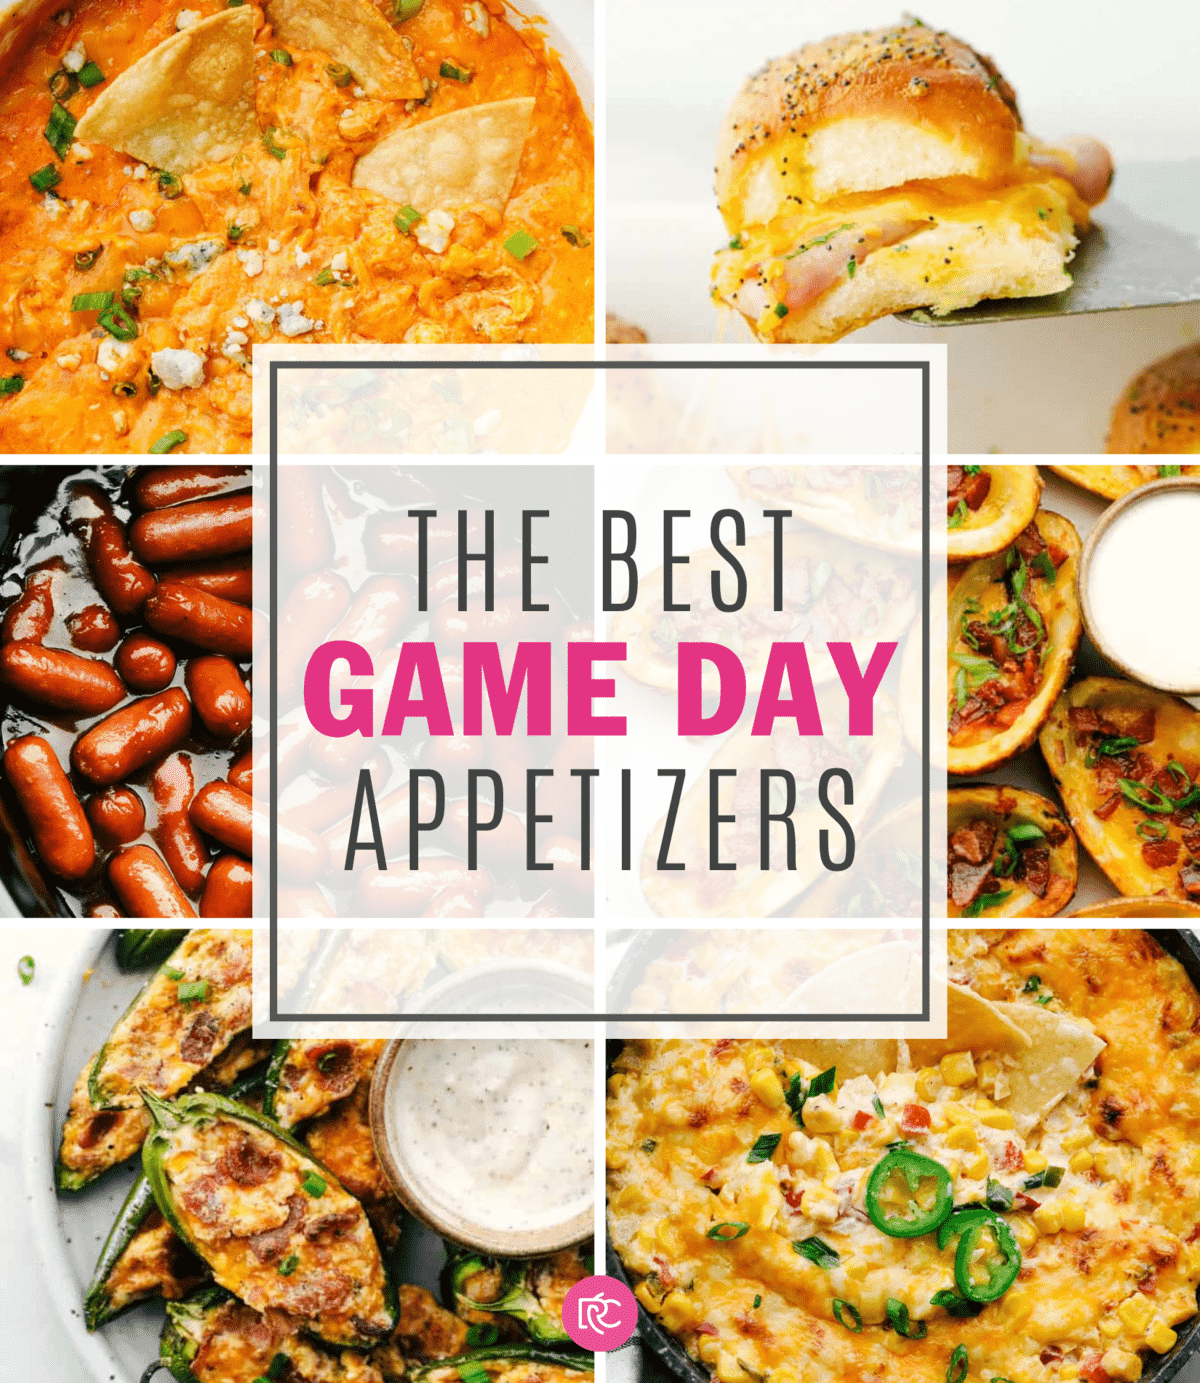 Game Day Appetizers Roundup